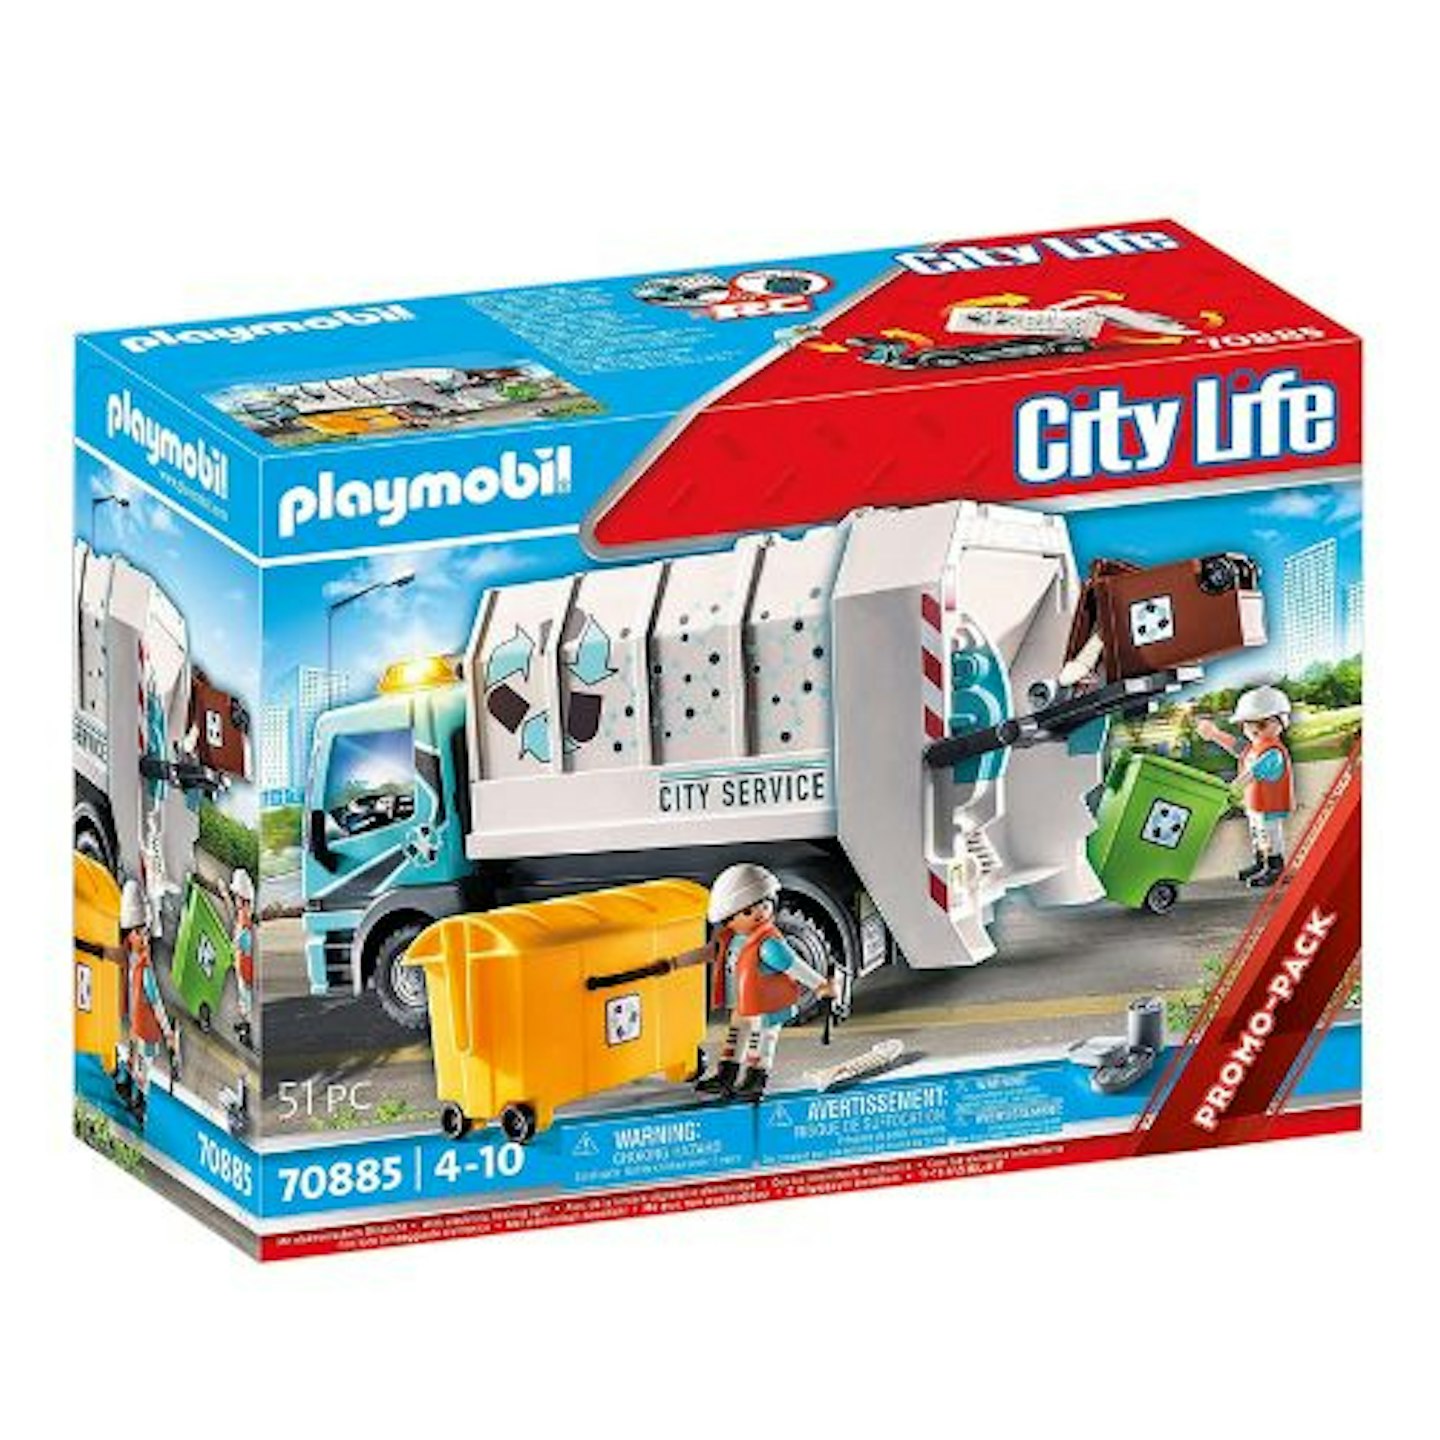 PLAYMOBIL City Life 70885 Recycling Truck with Flashing Light